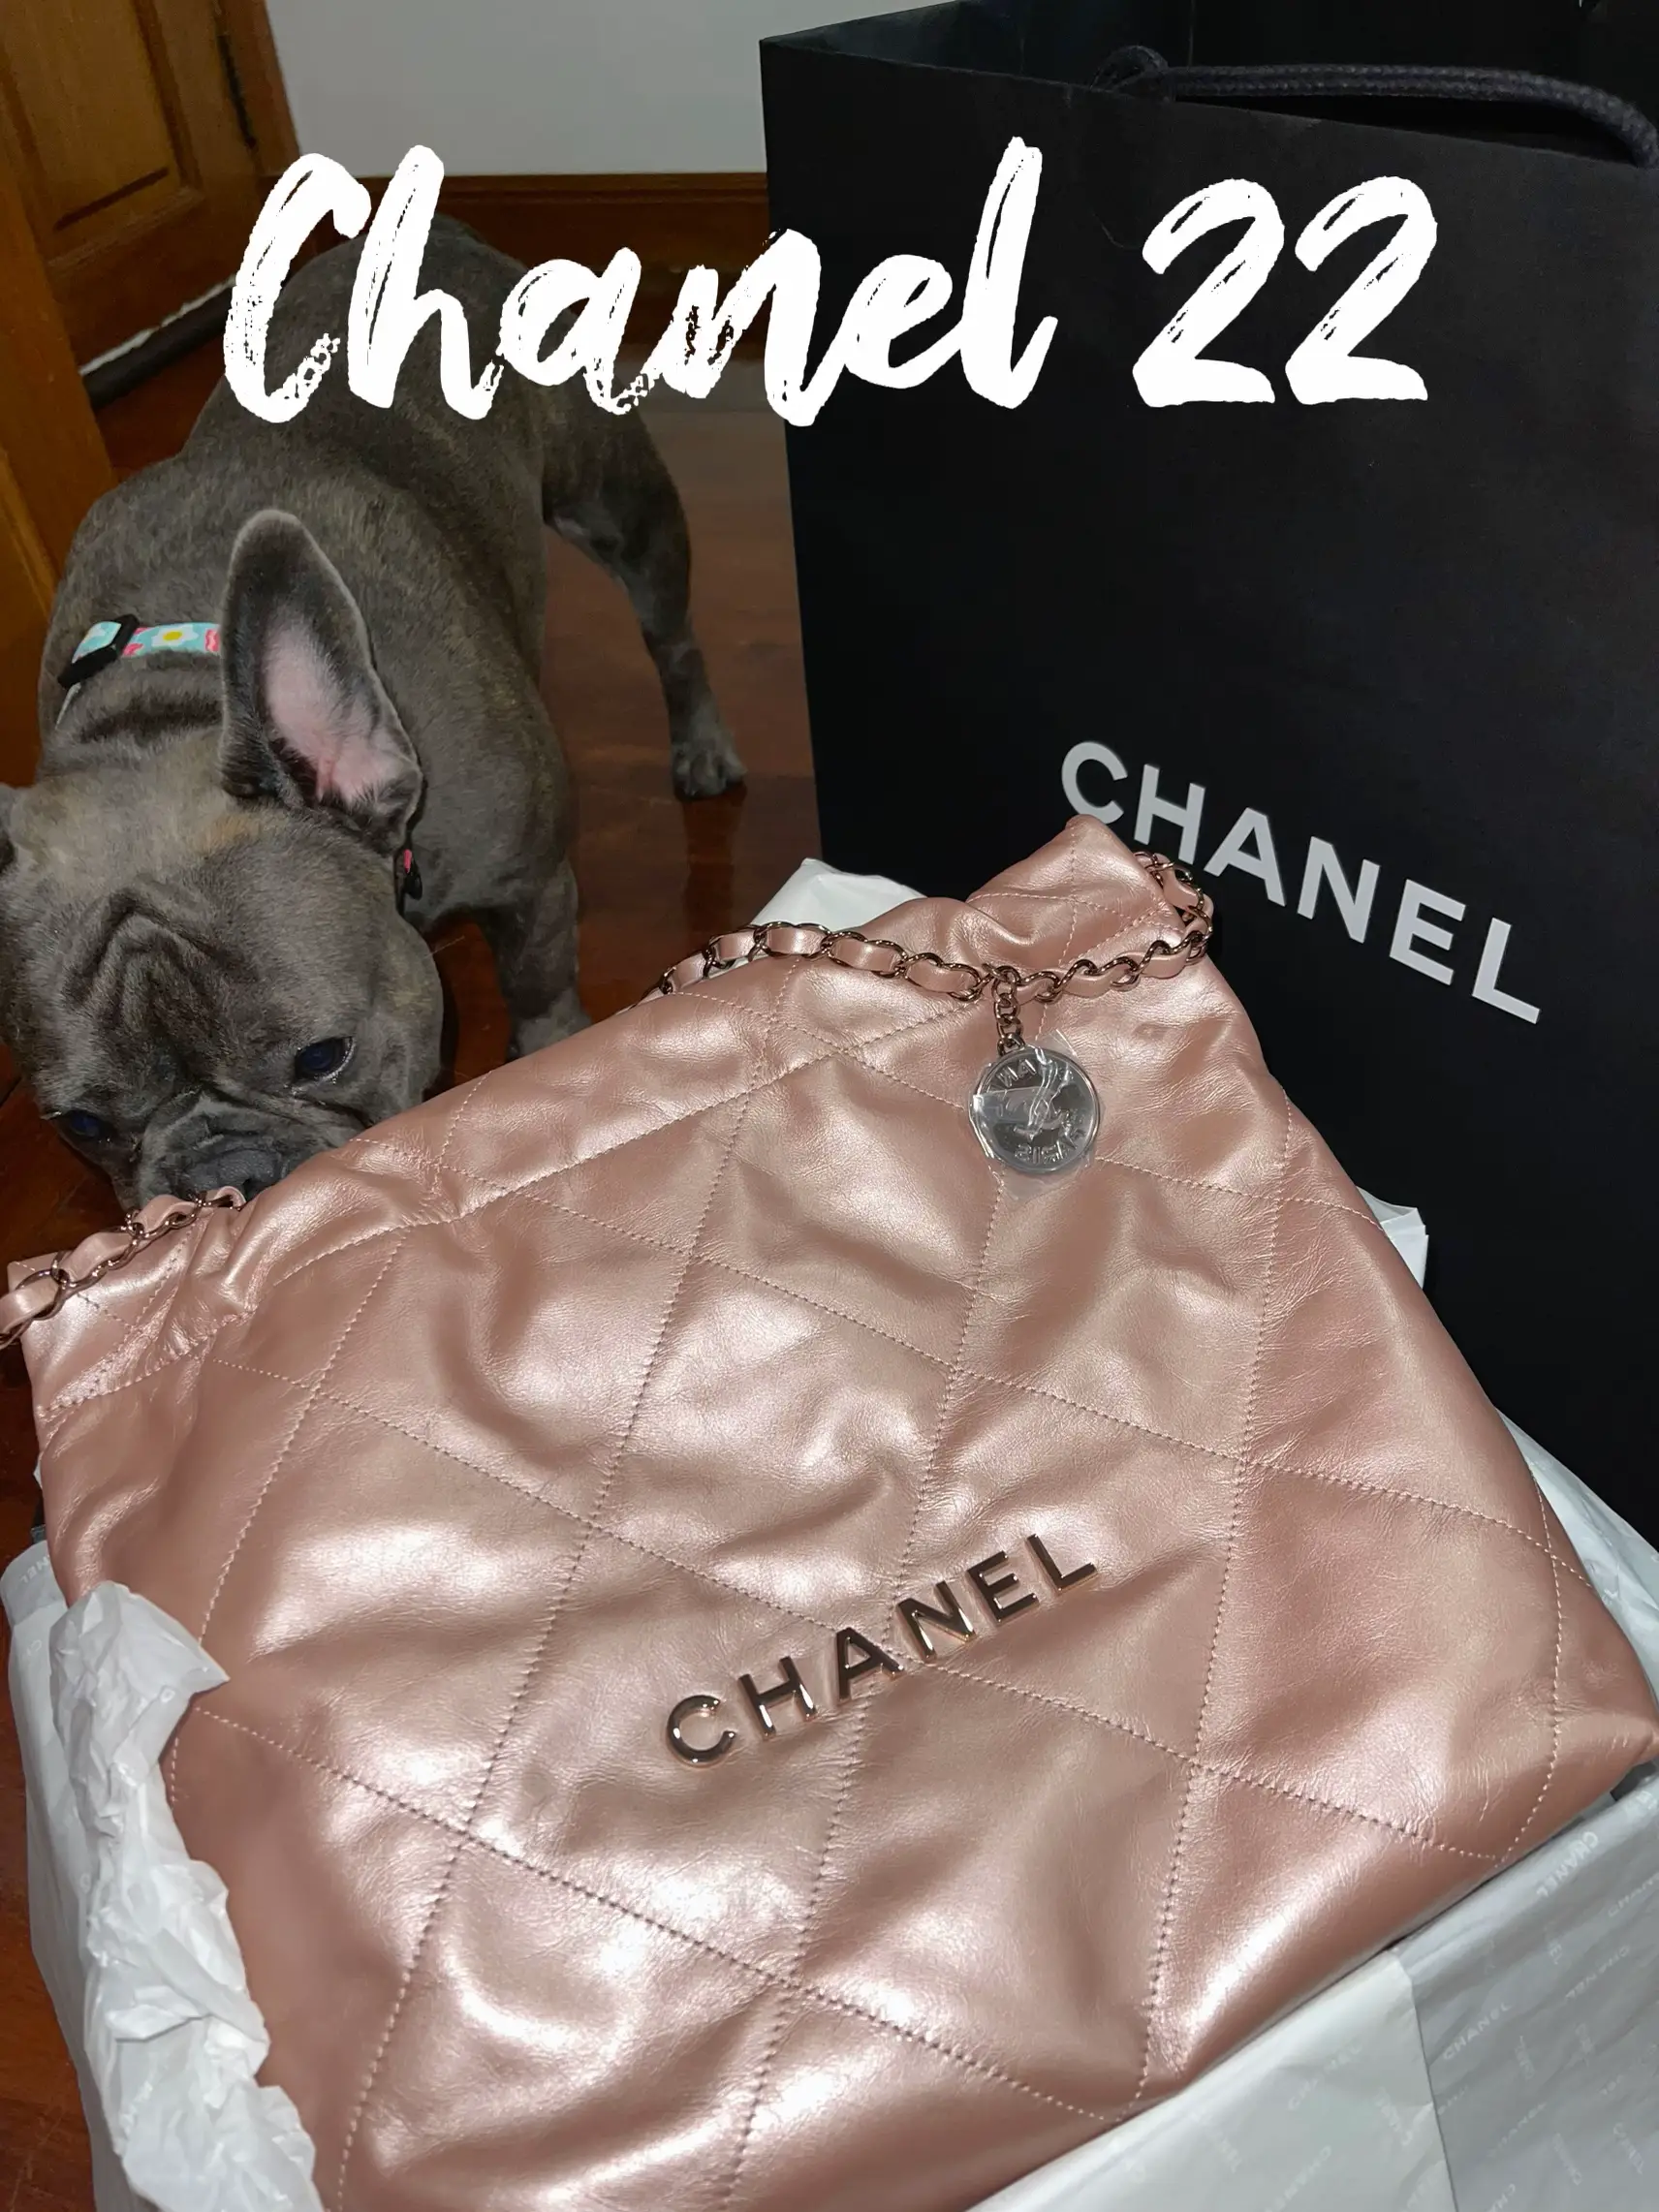 STYLING THE CHANEL 22 BAG A LA INDONESIAN INFLUENCERS - Time